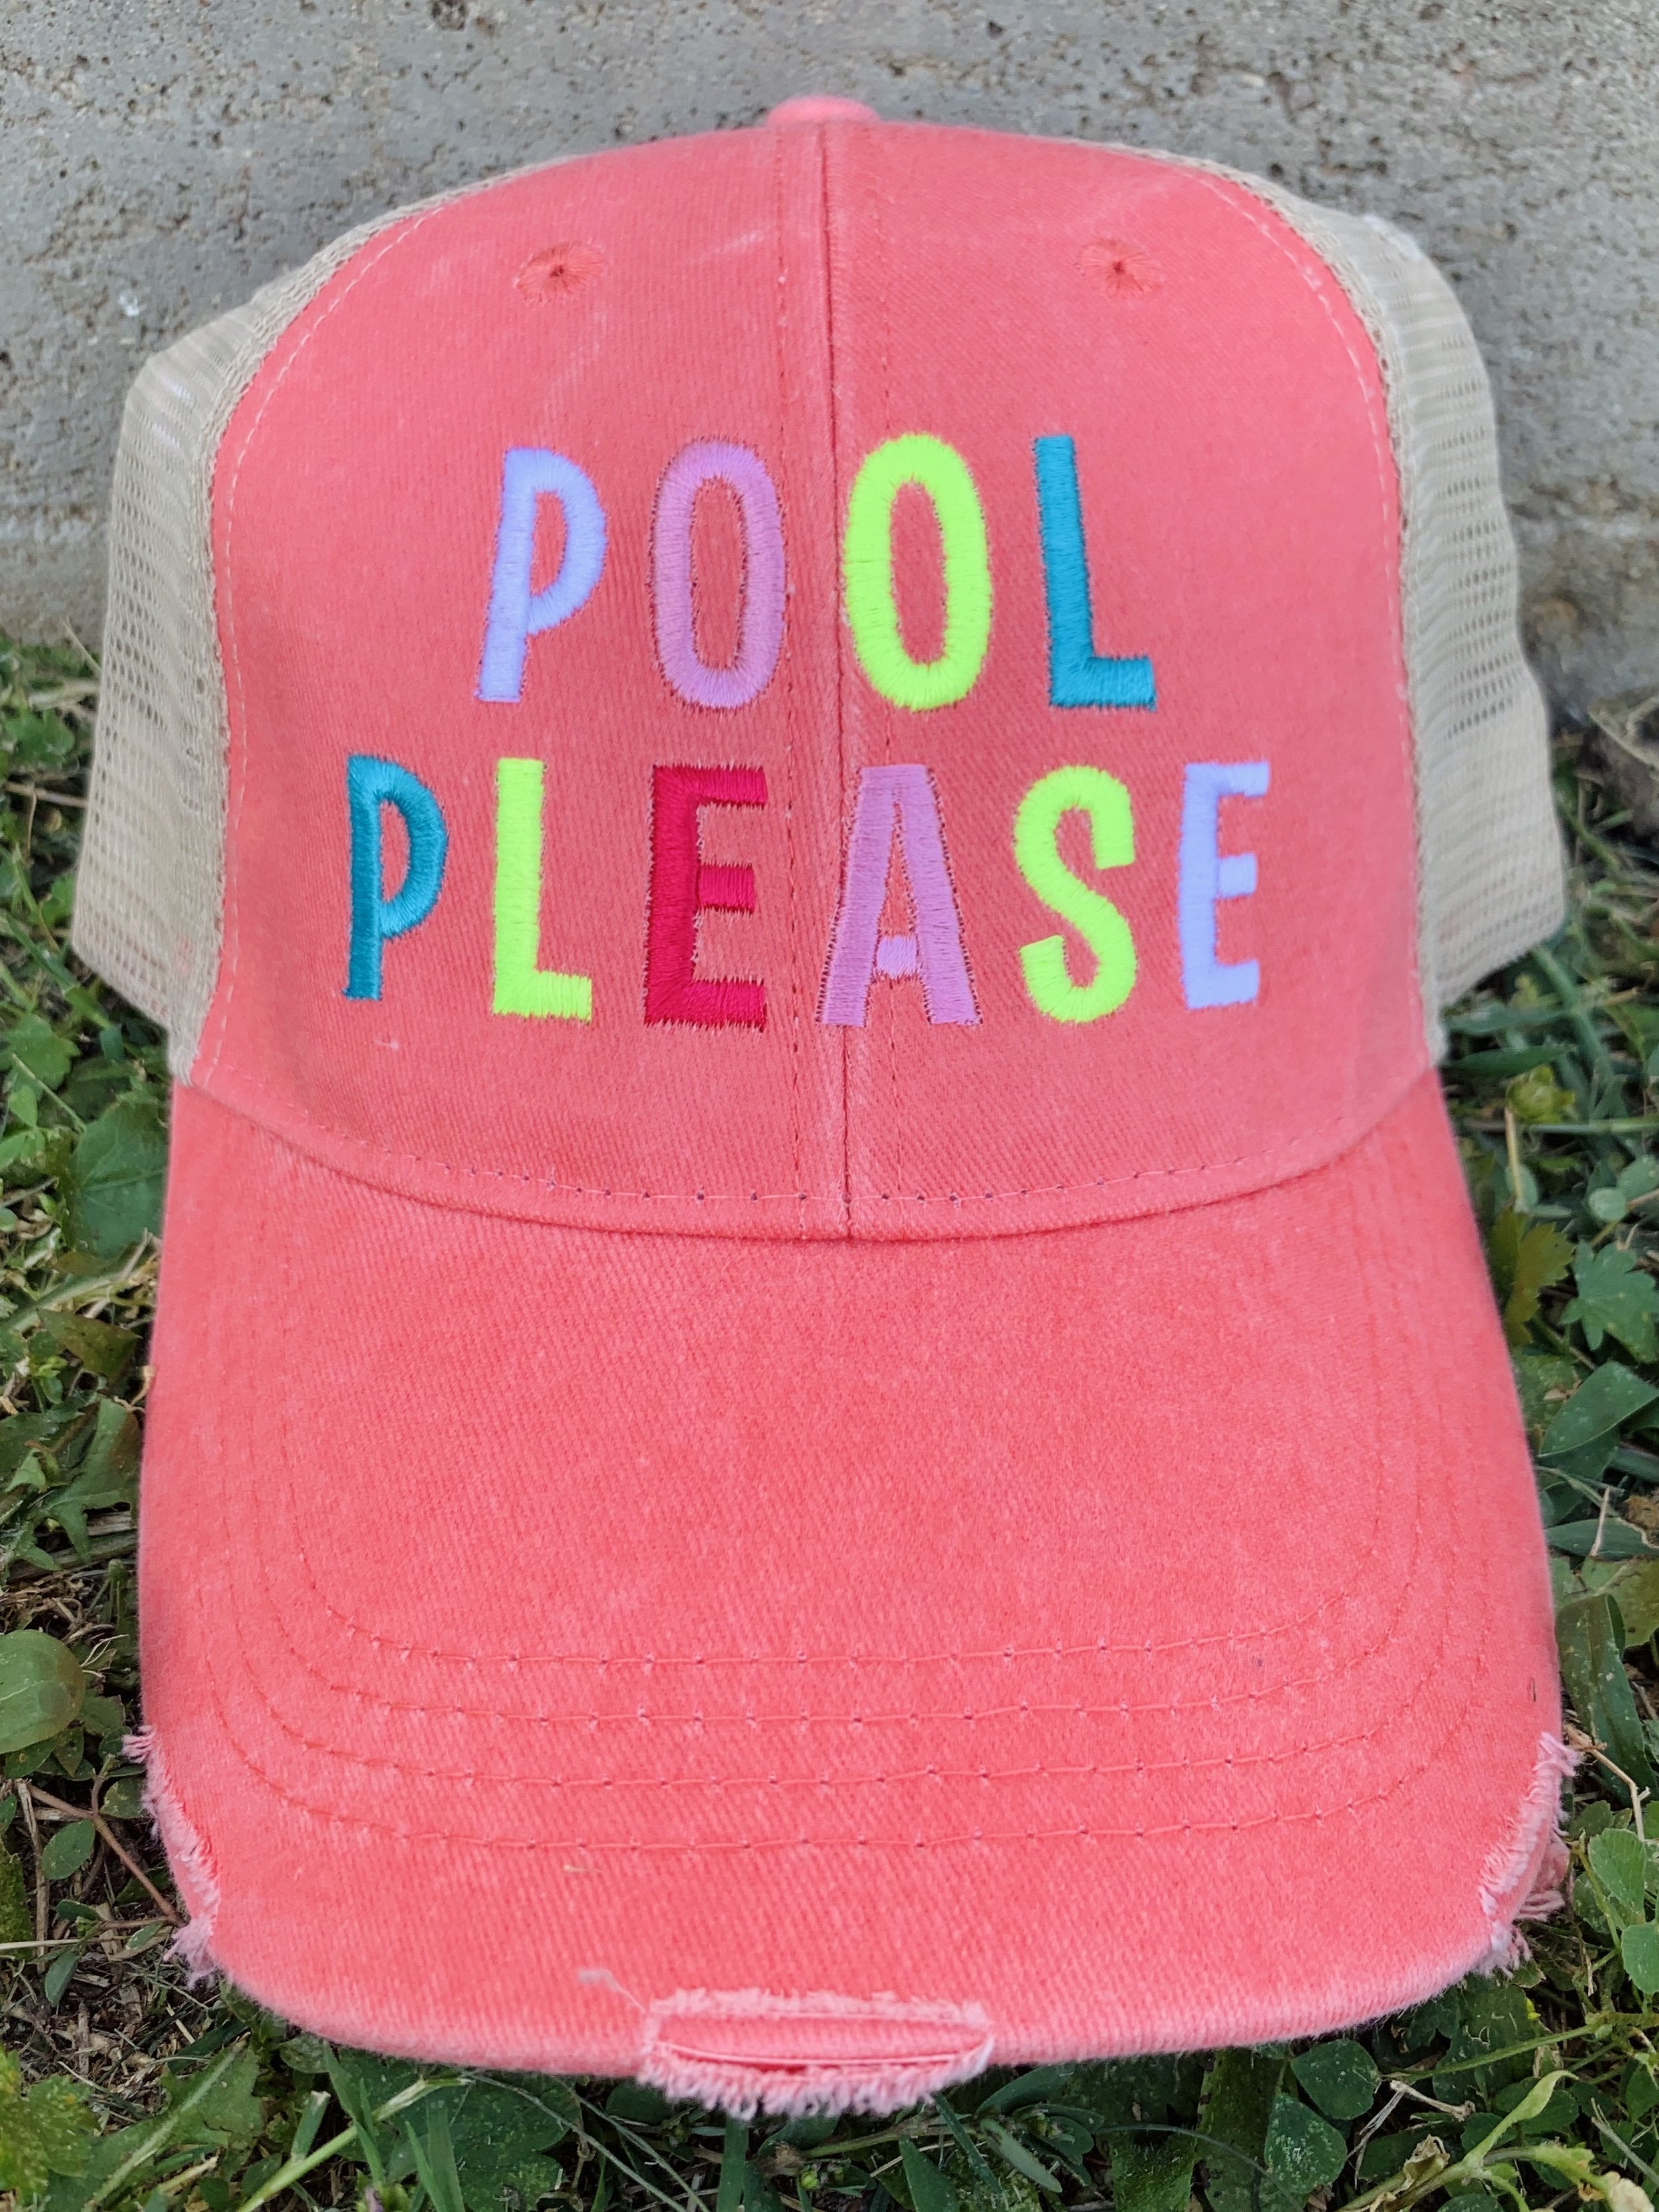 Pool Please Hat - Anagails exclusive hat line is finally here! We all hate bad hair days, and putting on a boring old hat can make it even worse! Brighten up your day with one.  These adorable hats are One Size, adjustable light weight baseball caps.  Great for trips to the beach, pool or a day out running errands! 